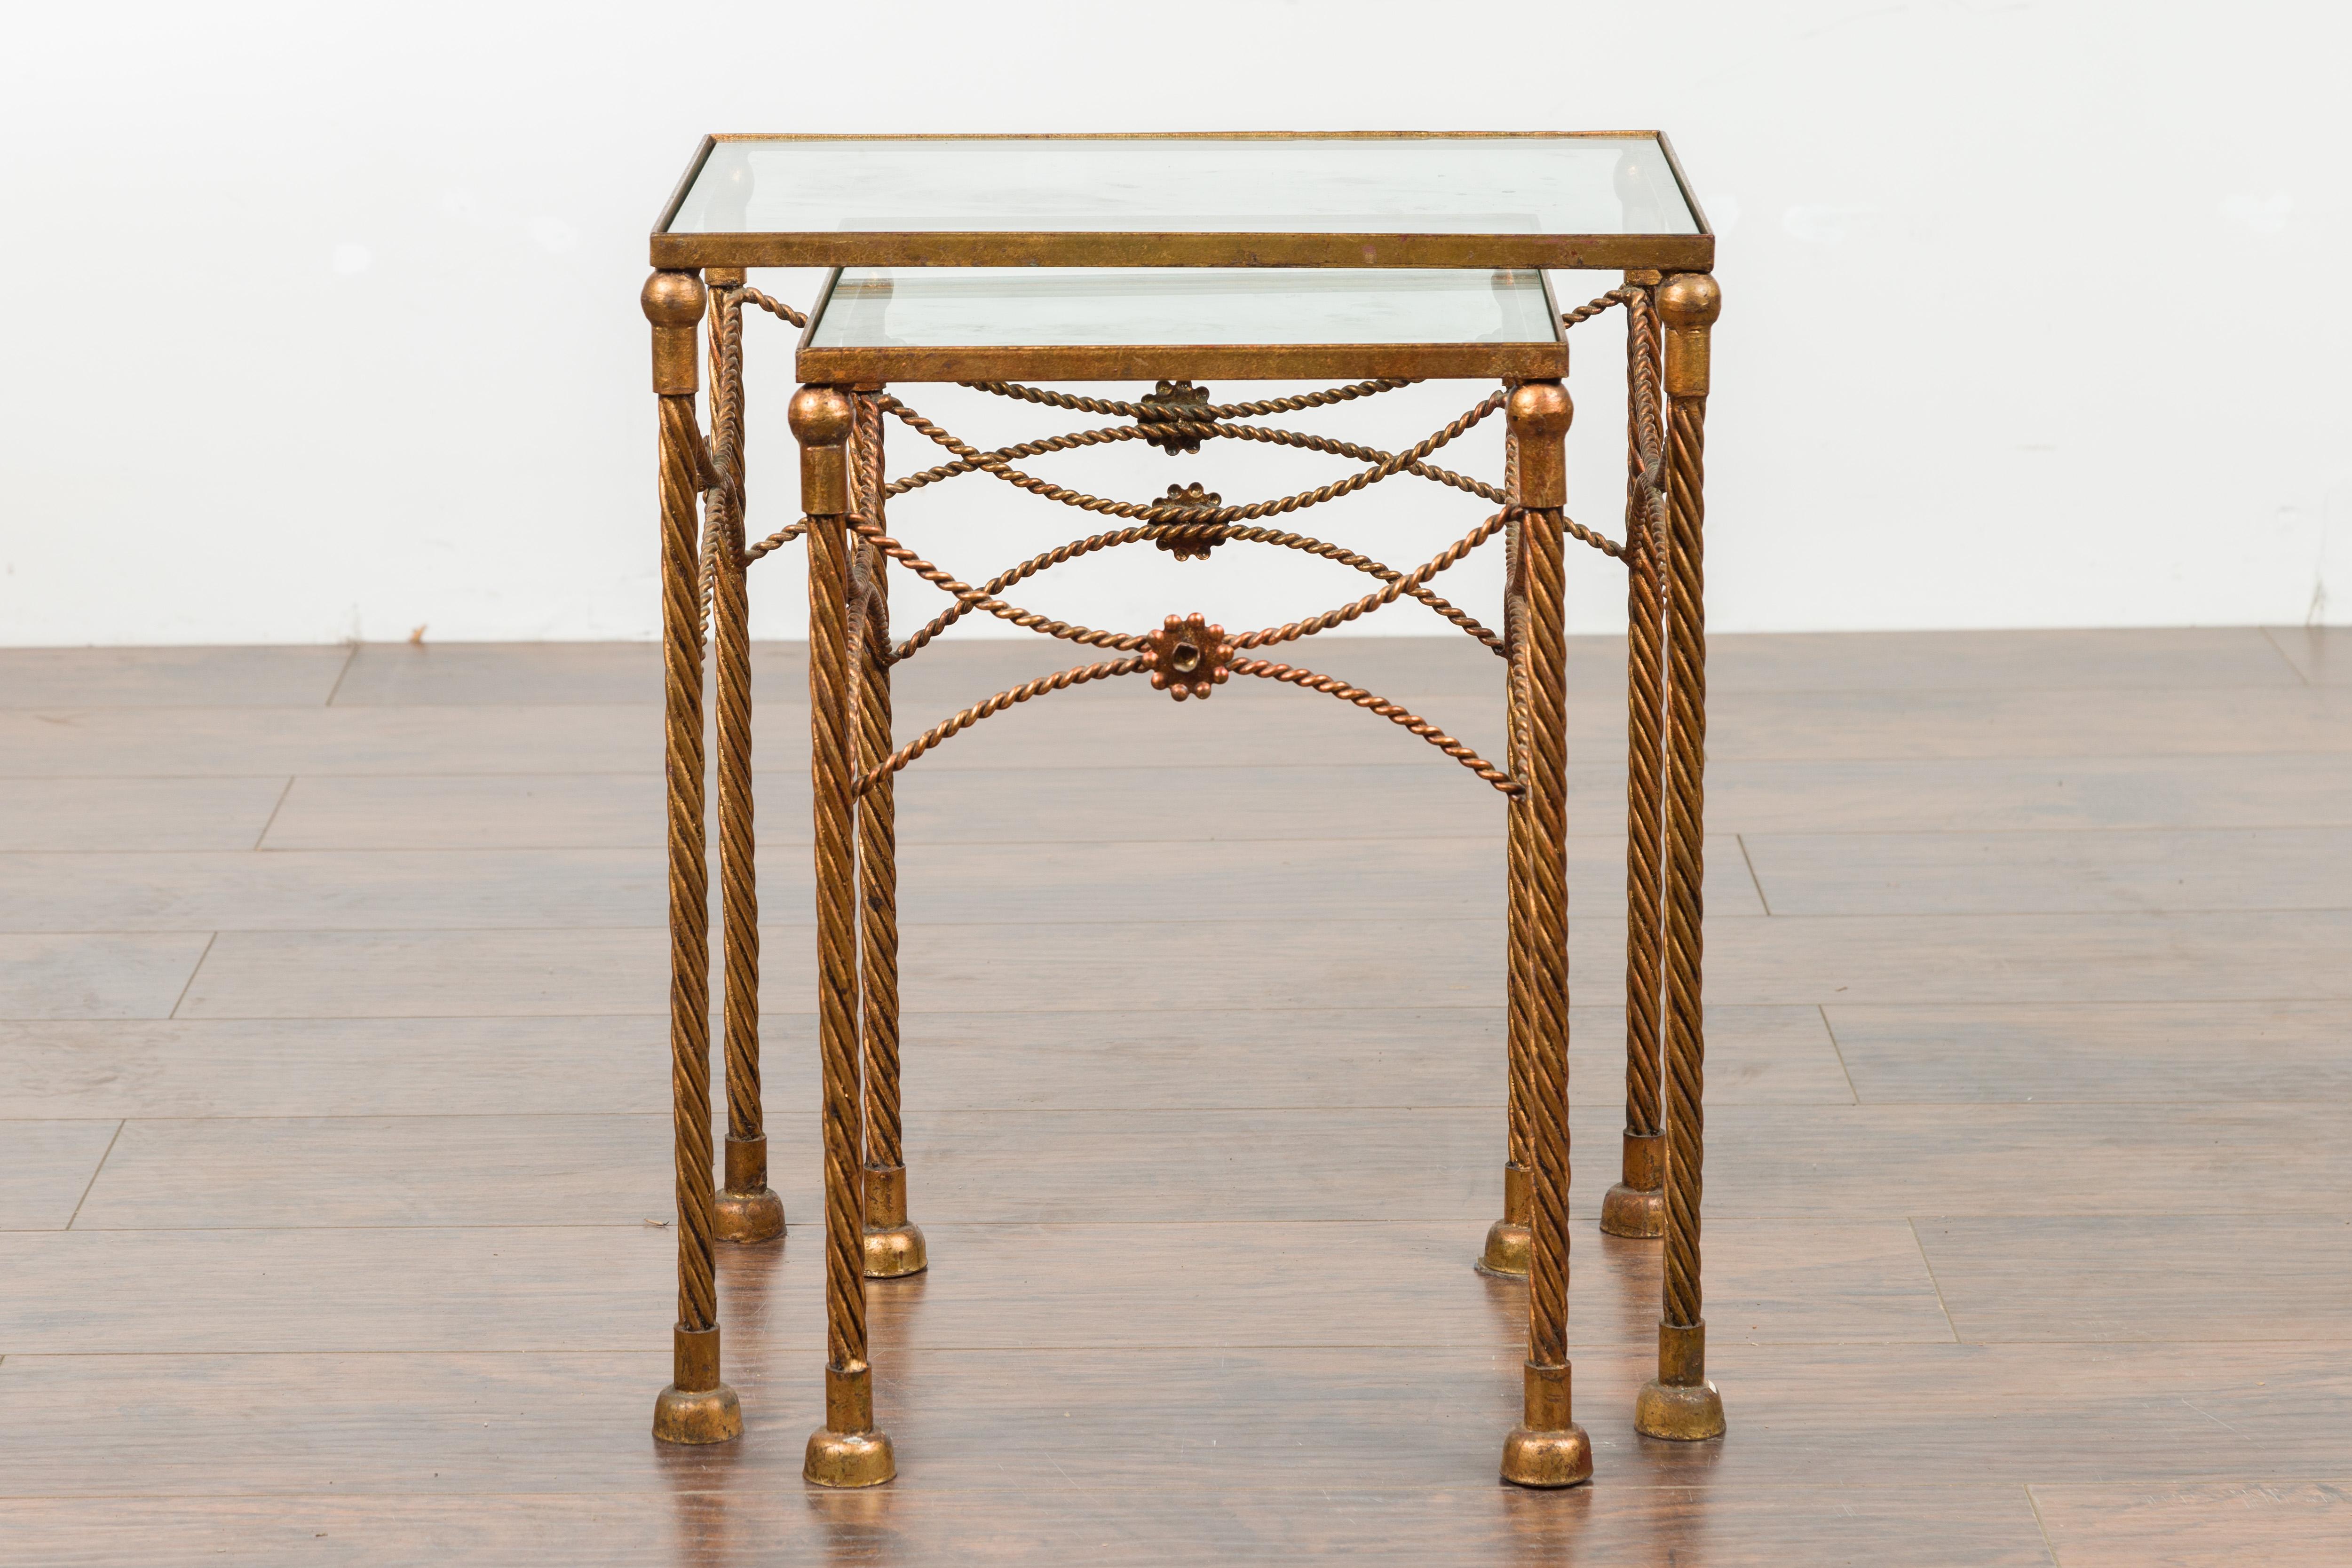 A pair of vintage French gilt metal nesting tables from the mid-20th century, with glass tops, twisted design and floral motifs. Created in France during the midcentury period, each of this pair of 